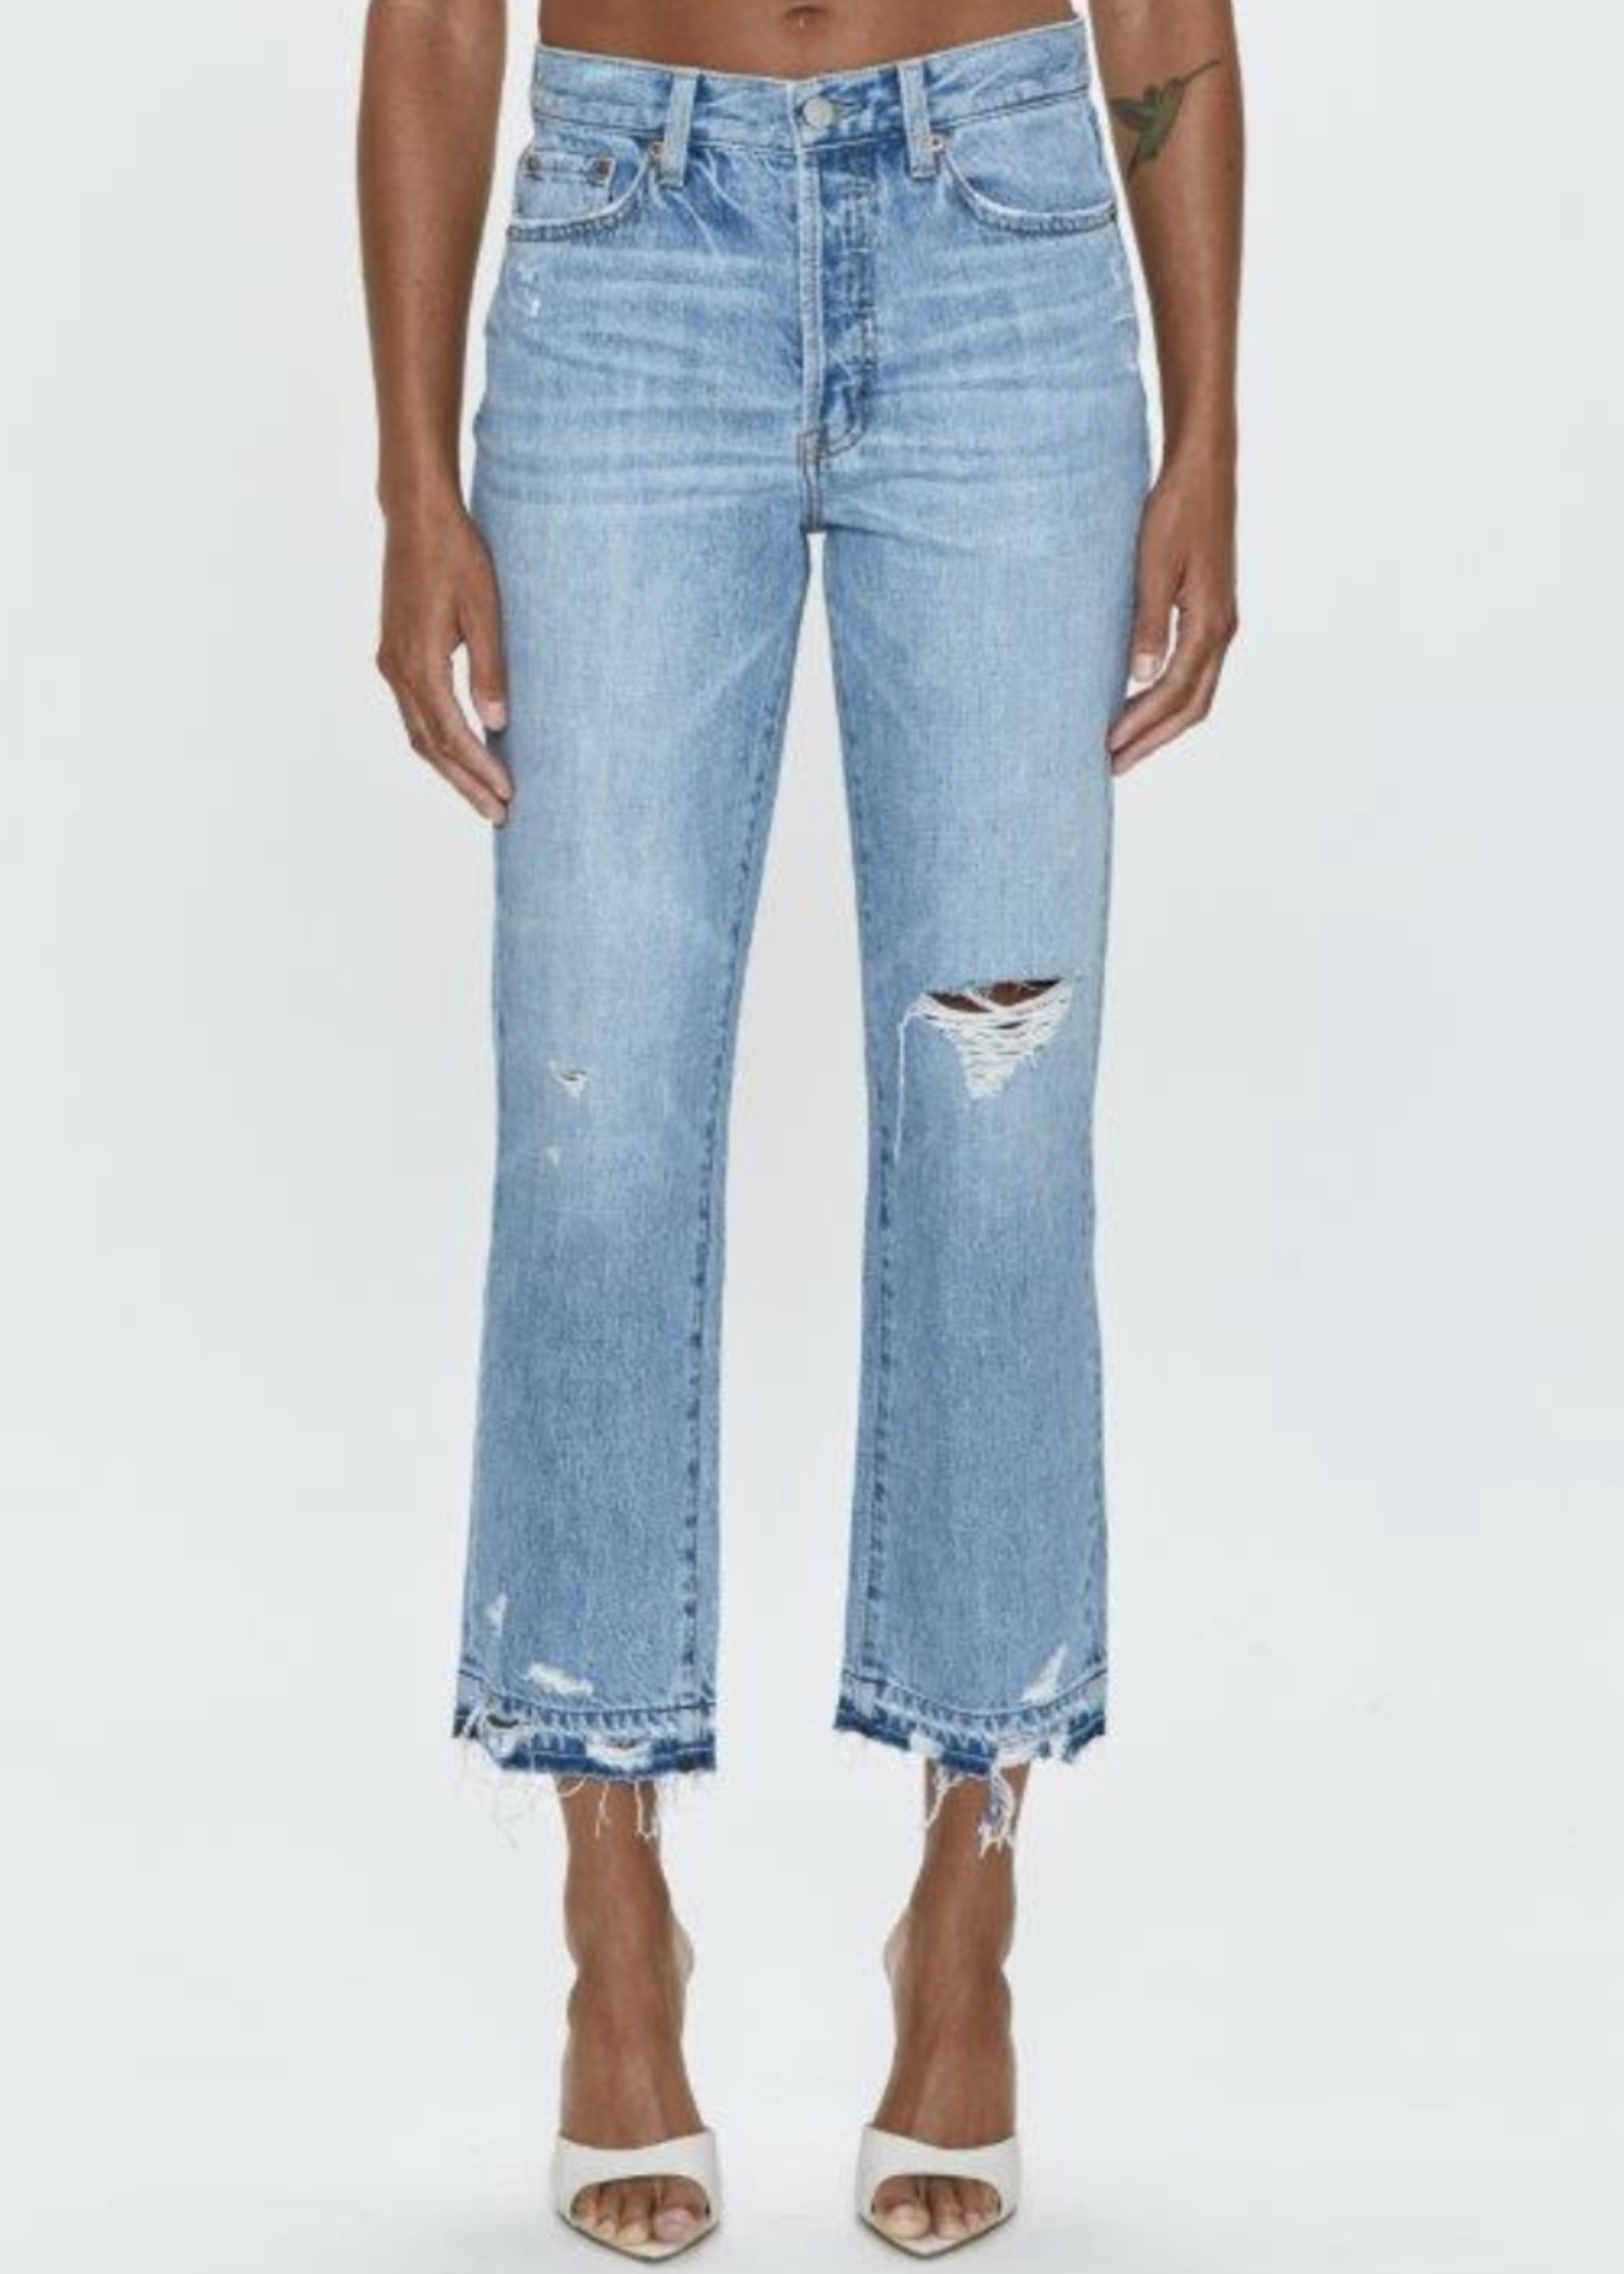 PISTOLA CHARLIE HIGH RISE CLASSIC STRAIGHT JEAN